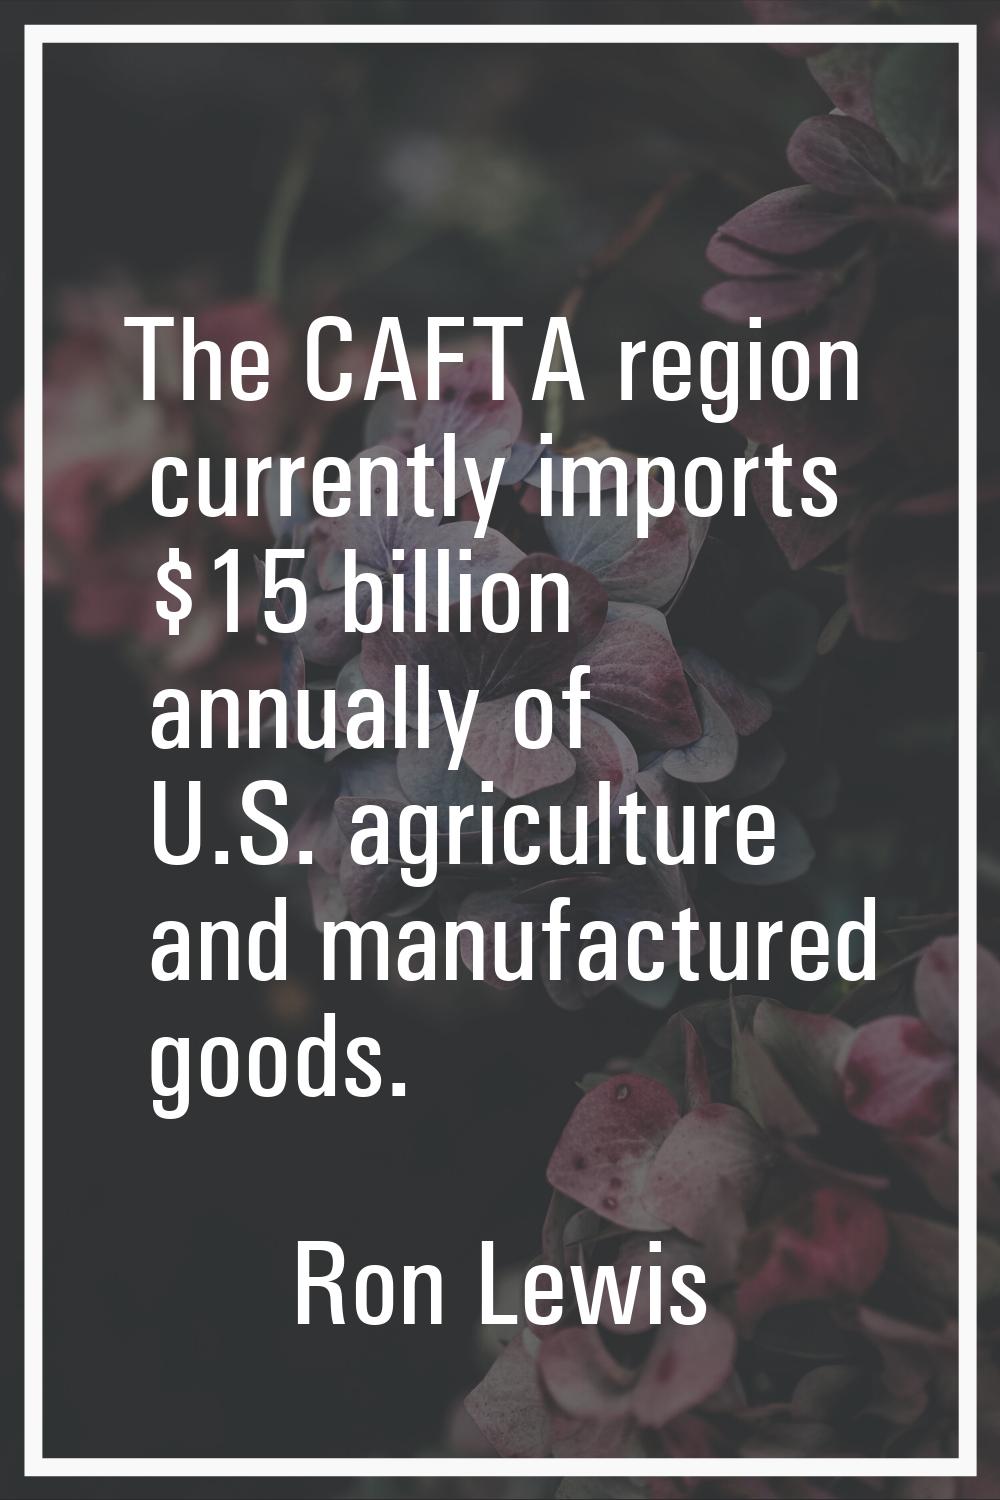 The CAFTA region currently imports $15 billion annually of U.S. agriculture and manufactured goods.